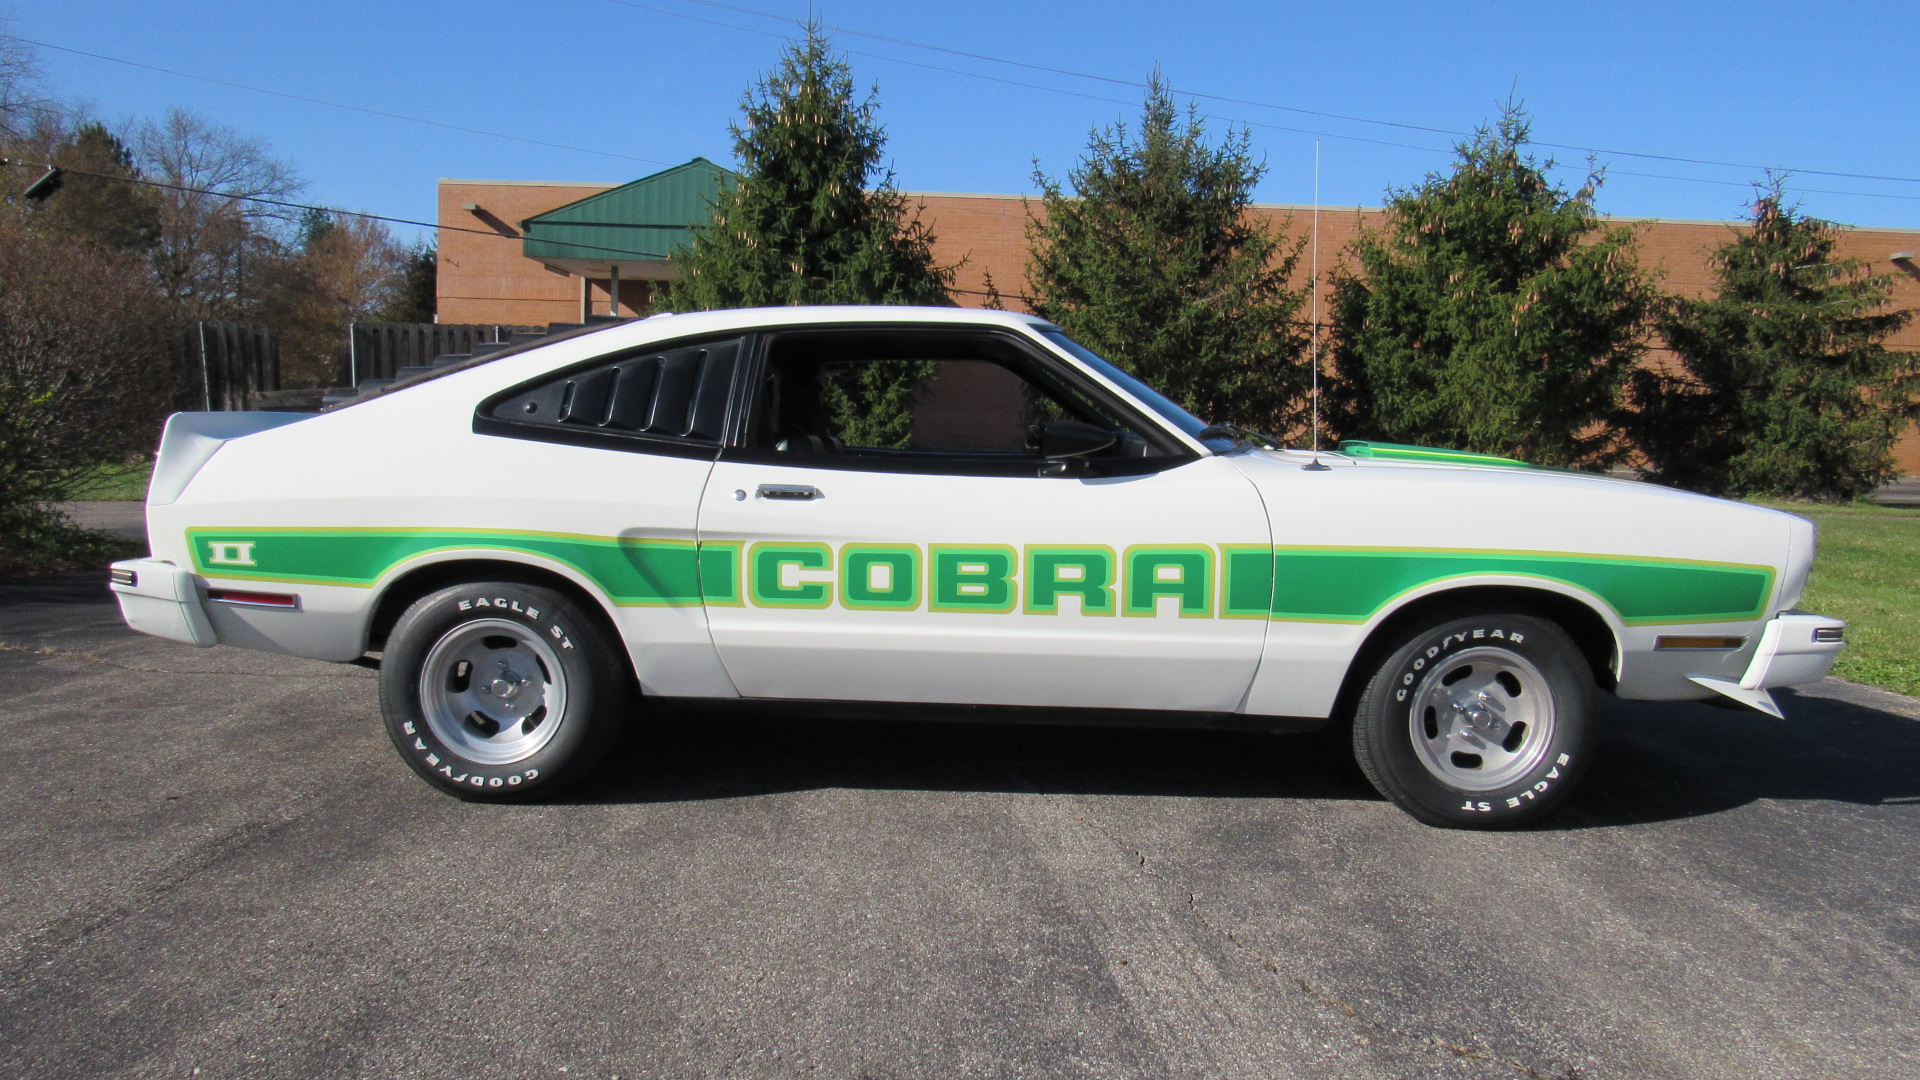 1978 Ford Mustang Cobra II, 92K Miles, Auto, SOLD!